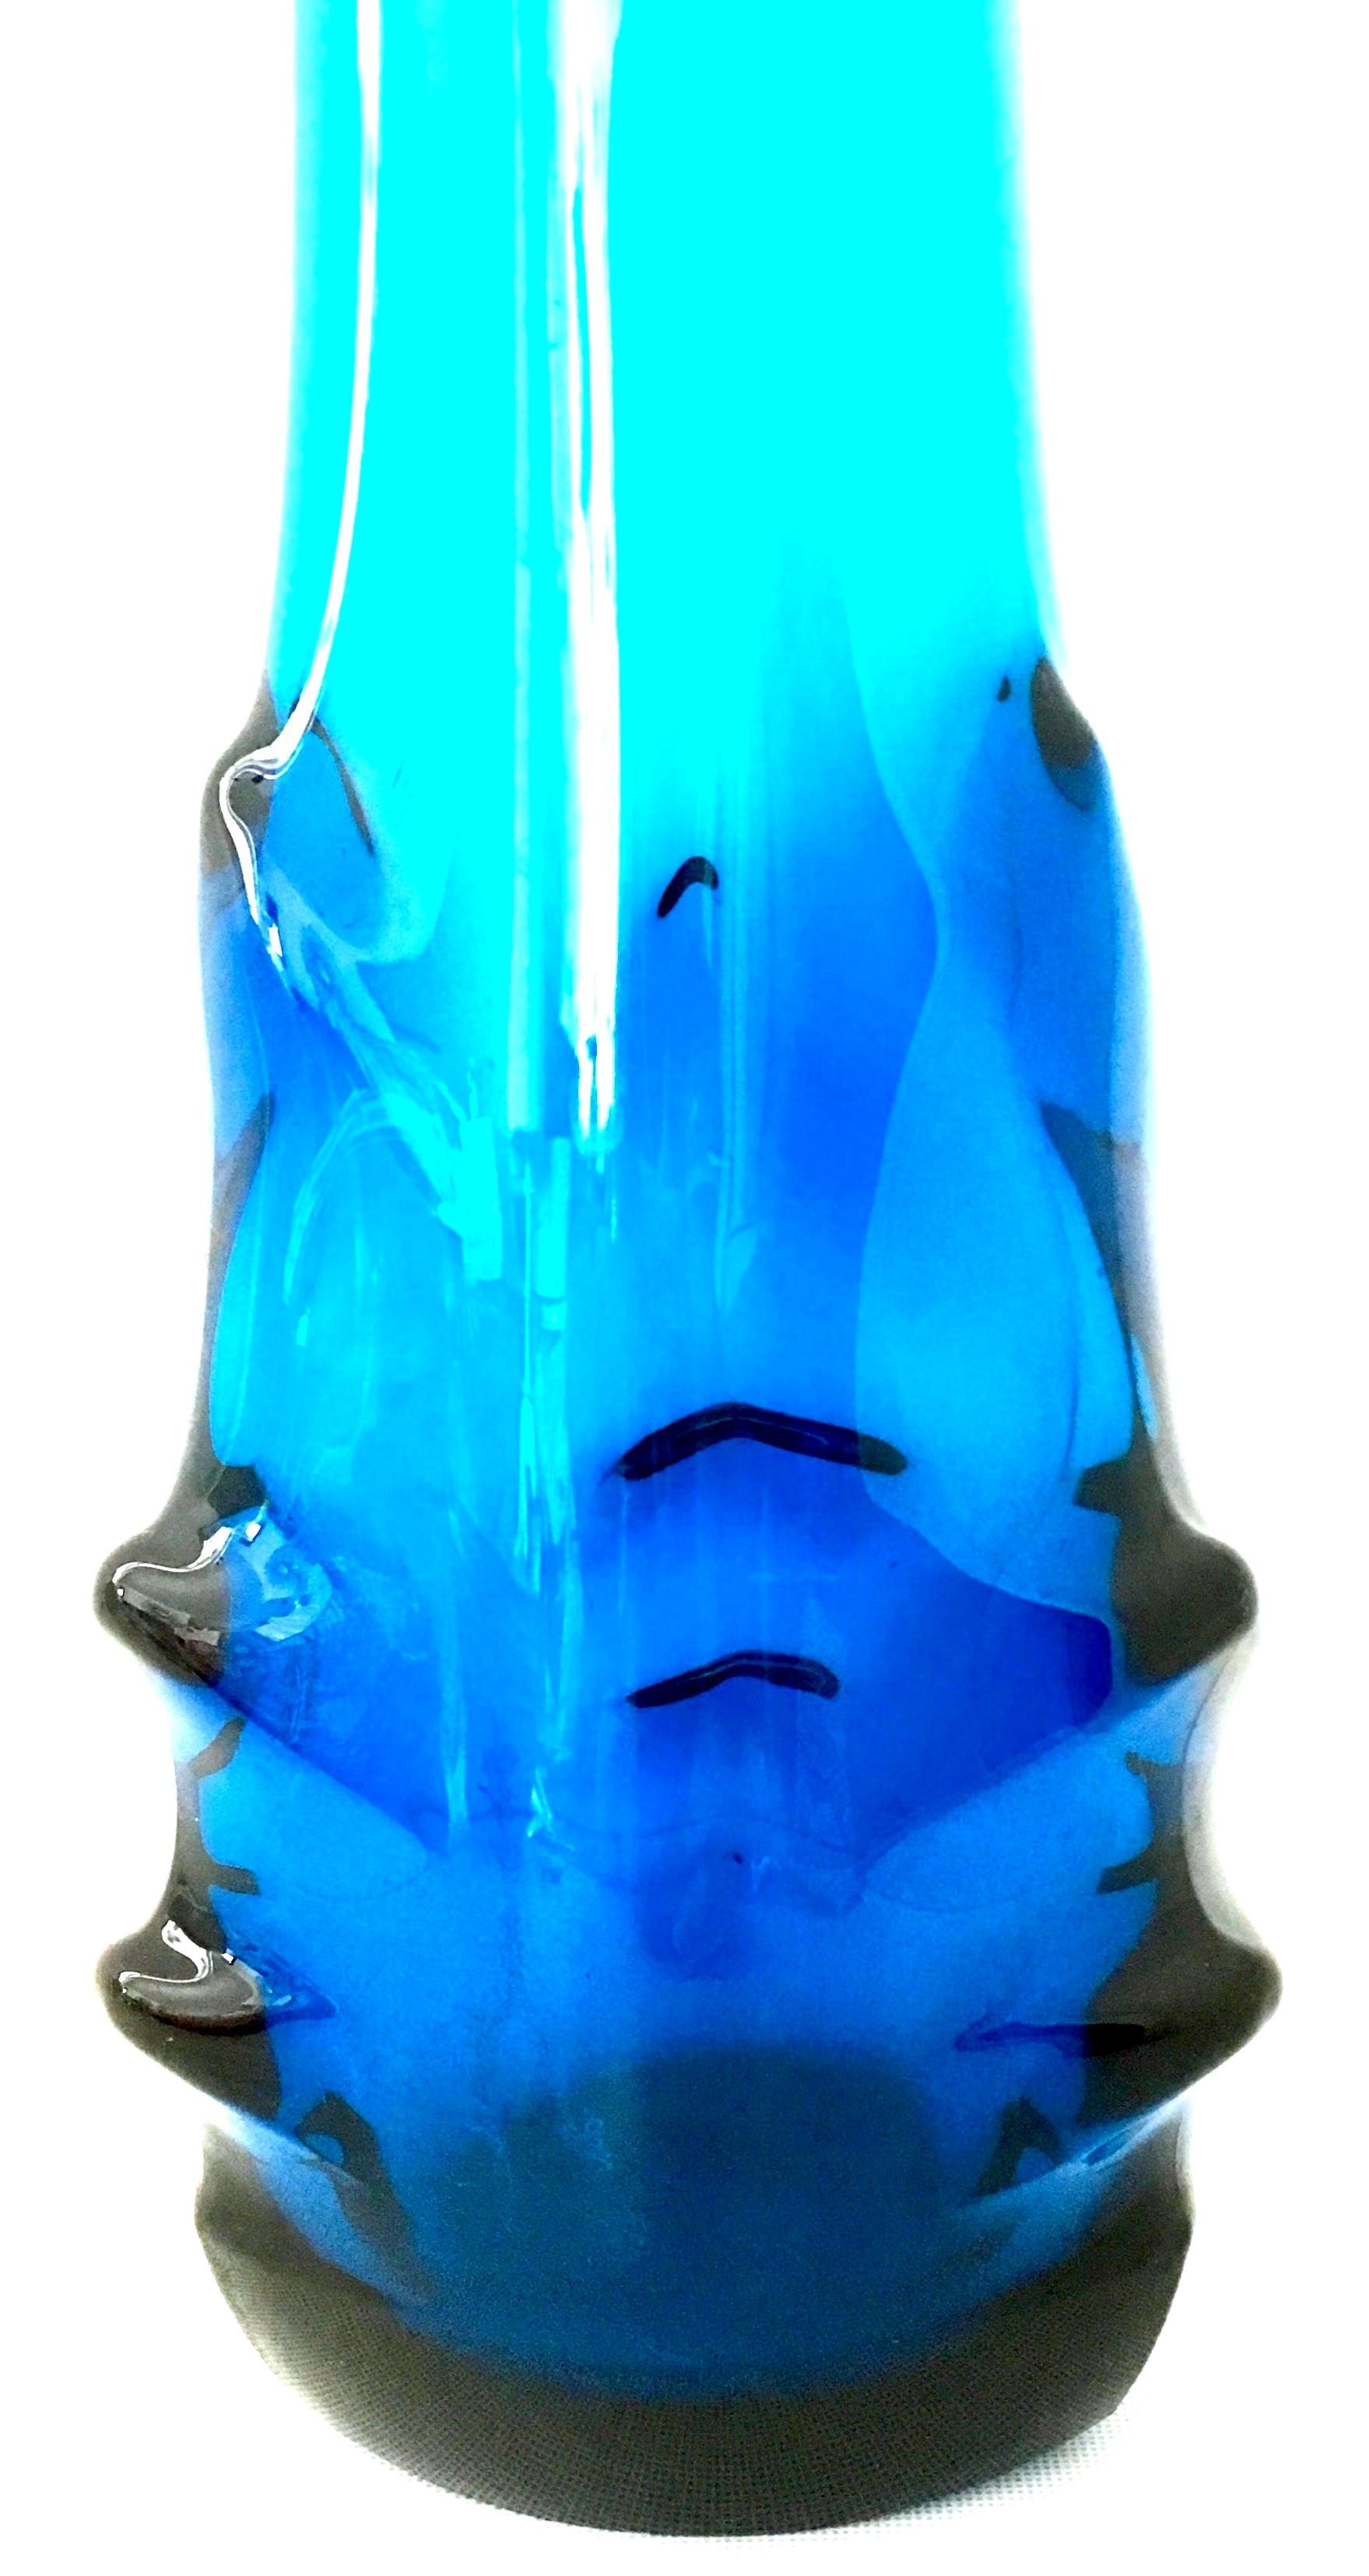 Mid-20th Century Modern Organic Form Slag and Rib Art Glass Vase In Good Condition For Sale In West Palm Beach, FL